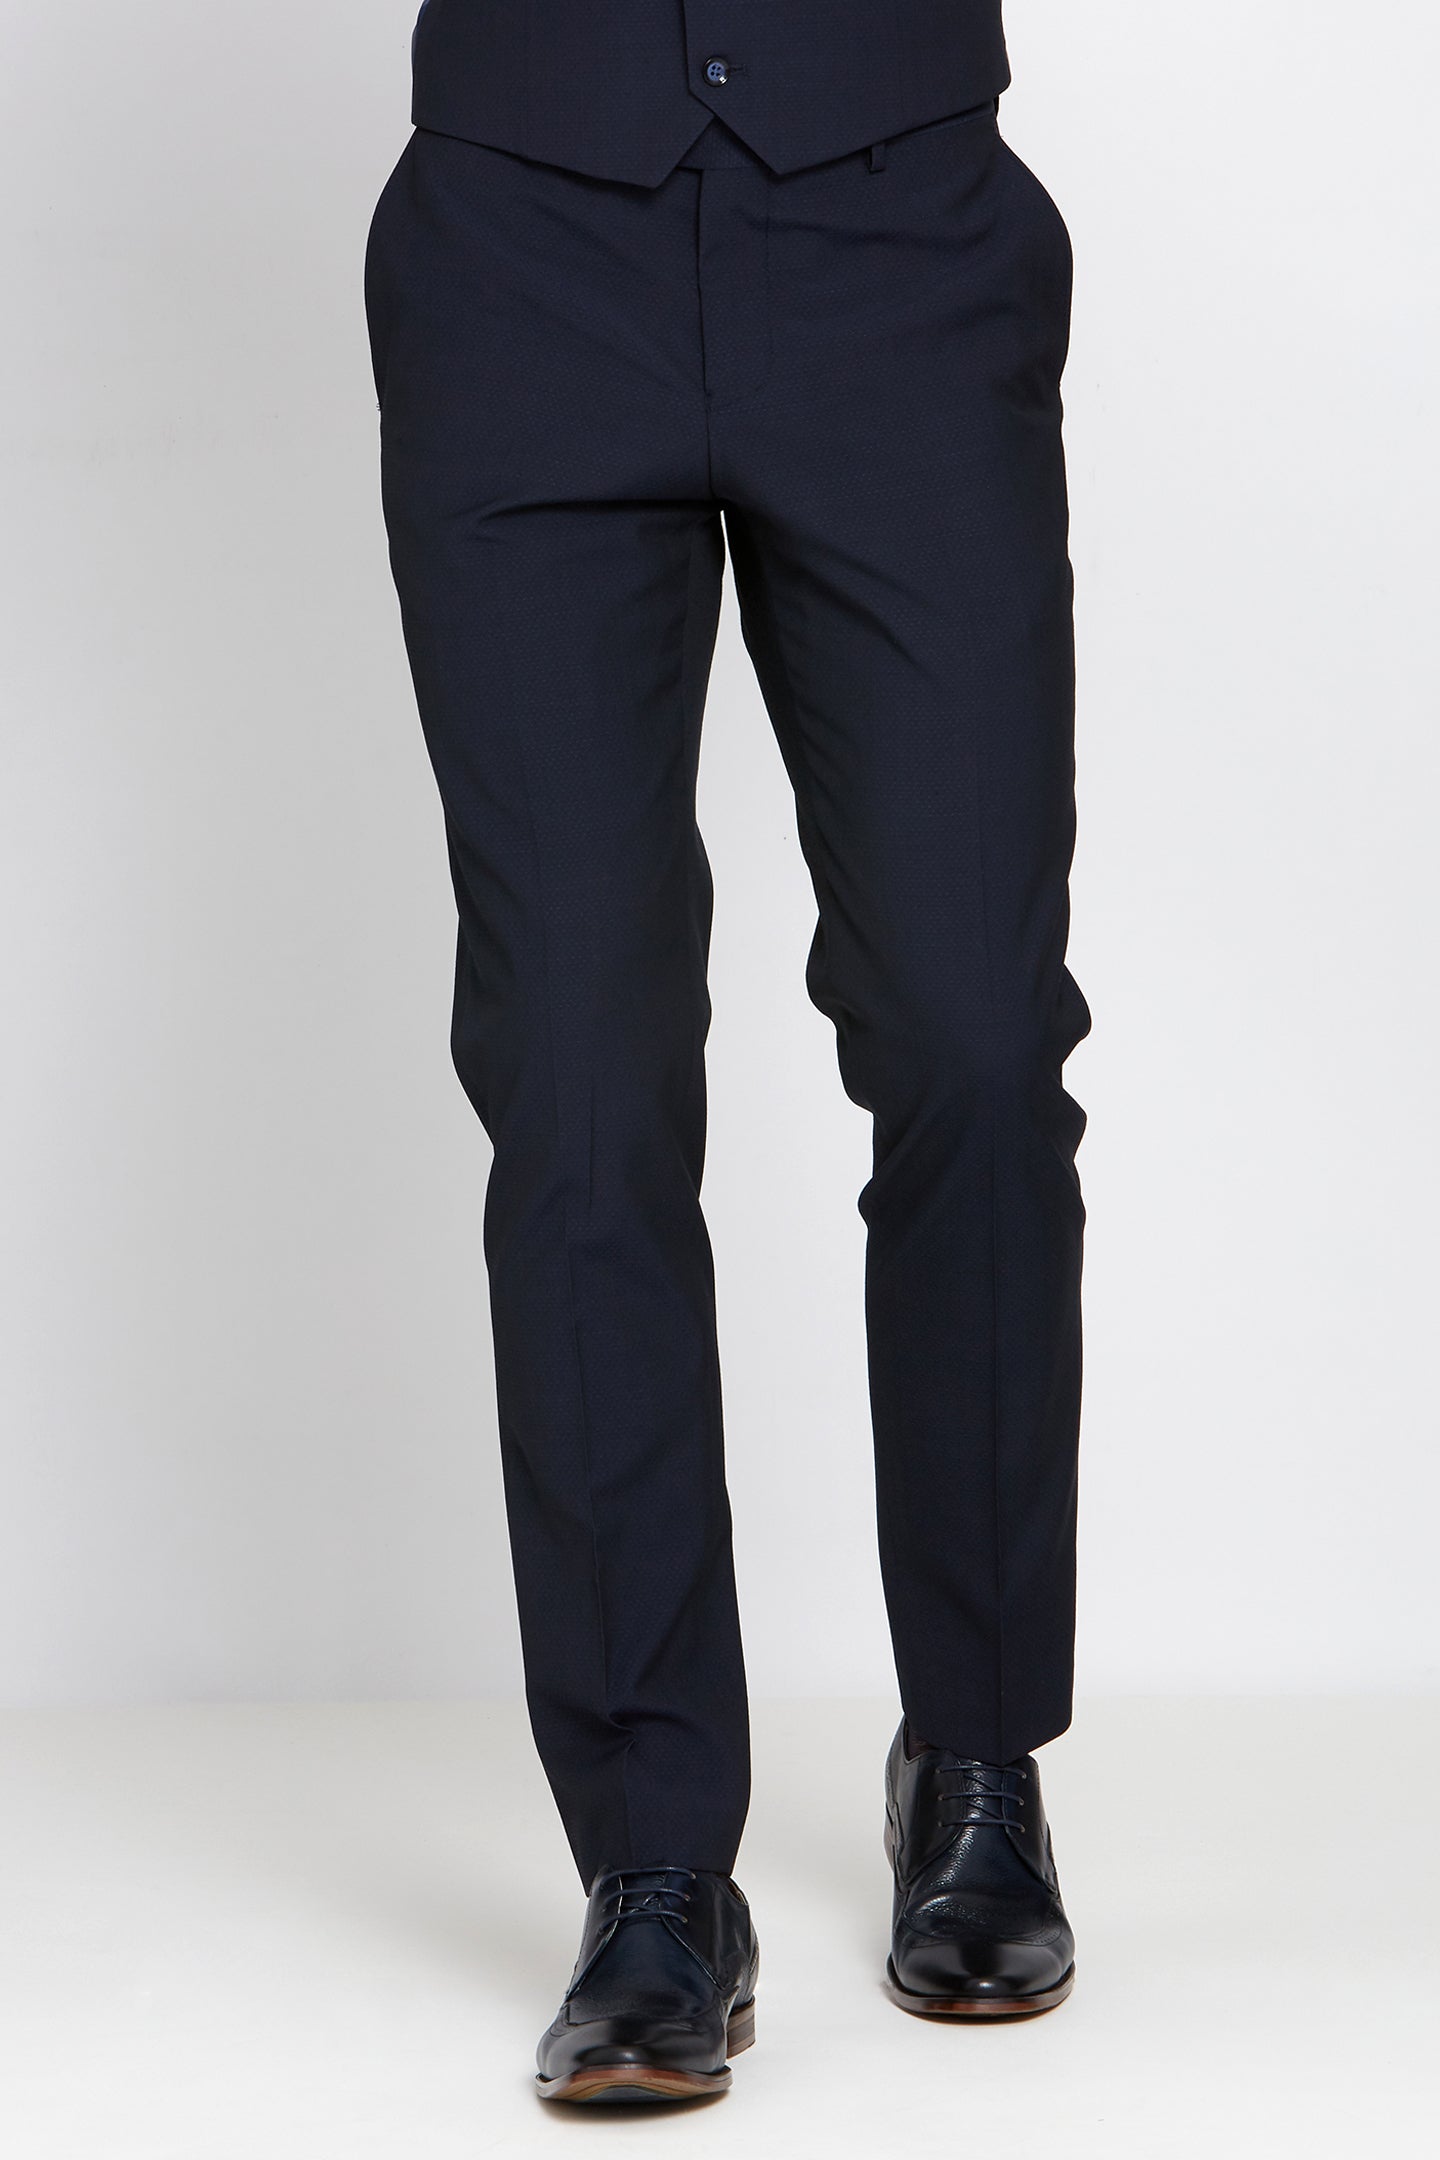 Benetti Cusack Navy Tapered Trousers - Spirit Clothing